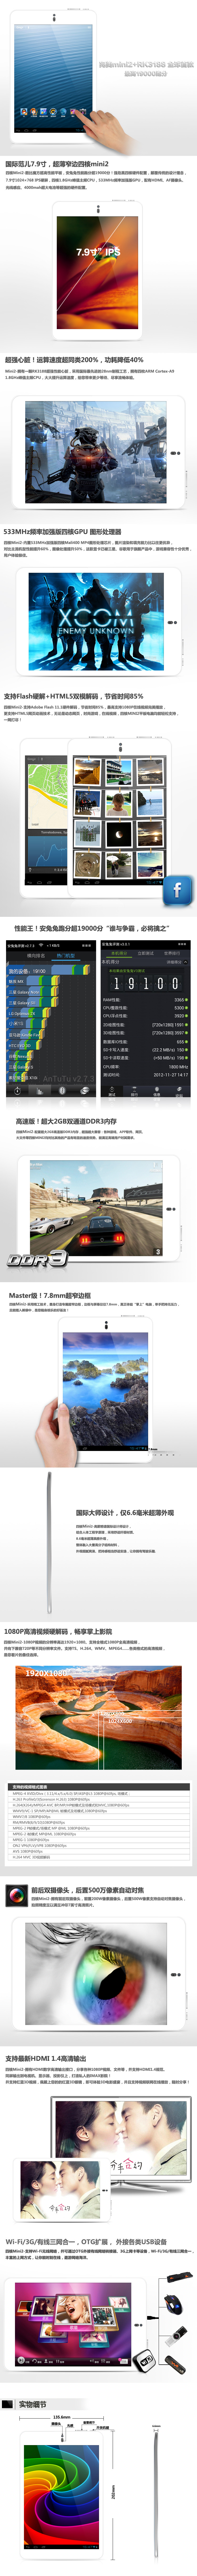 Cube U30gt Mini2 RK3188 Quad Core Tablet PC Review + Root Method + Firmware Upgrade